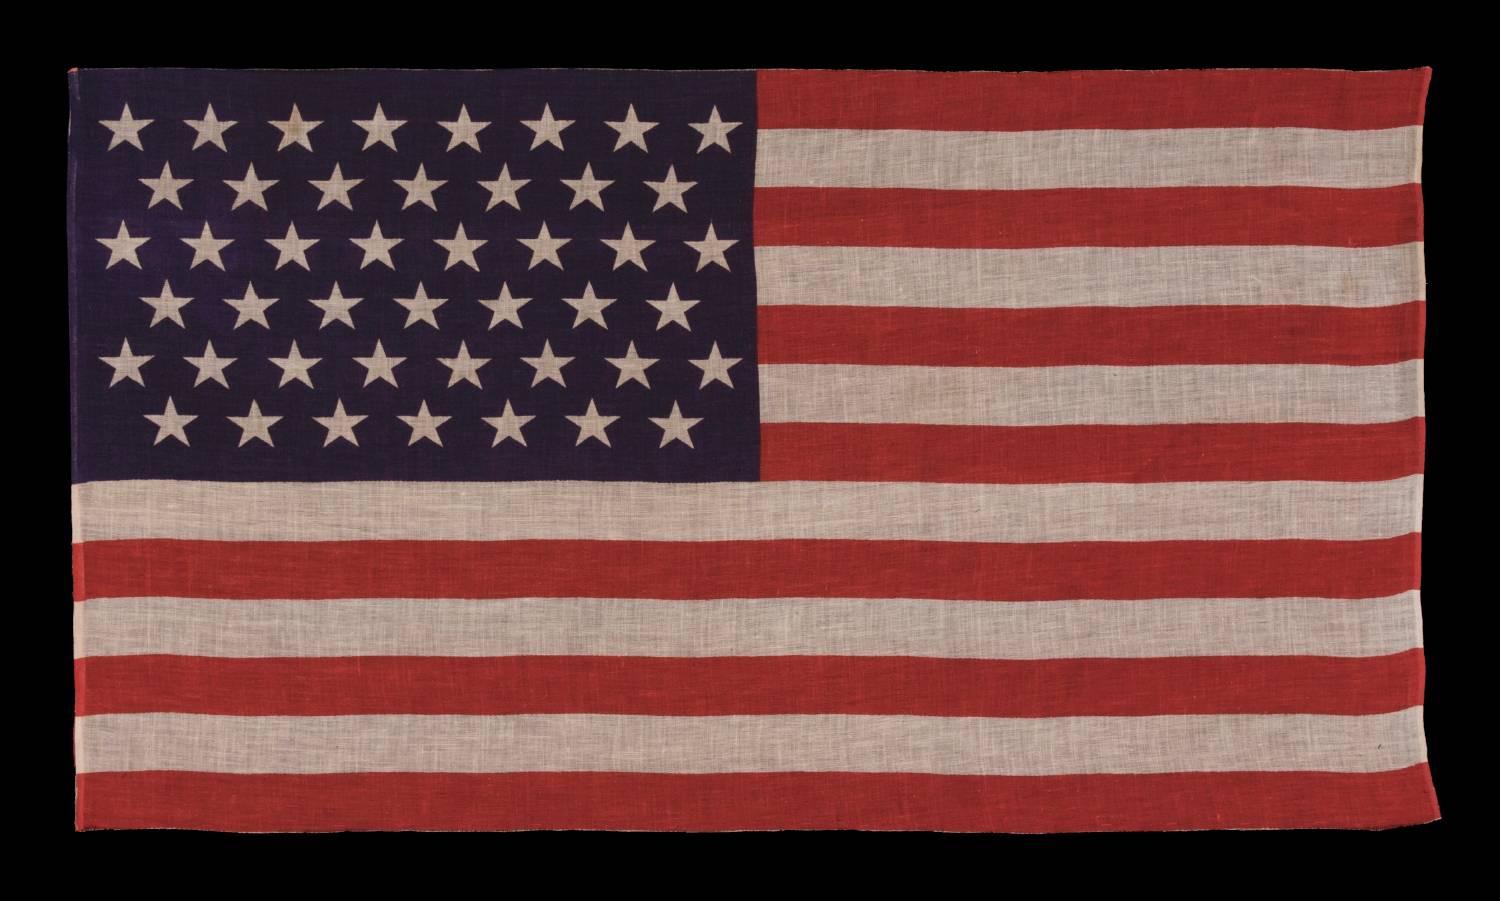 45 stars in staggered rows on an antique American parade flag of the 1896-1908 period, Spanish-American war era, reflecting Utah statehood:

45 star American national parade flag, printed on gauze-like cotton. The stars are arranged in staggered,